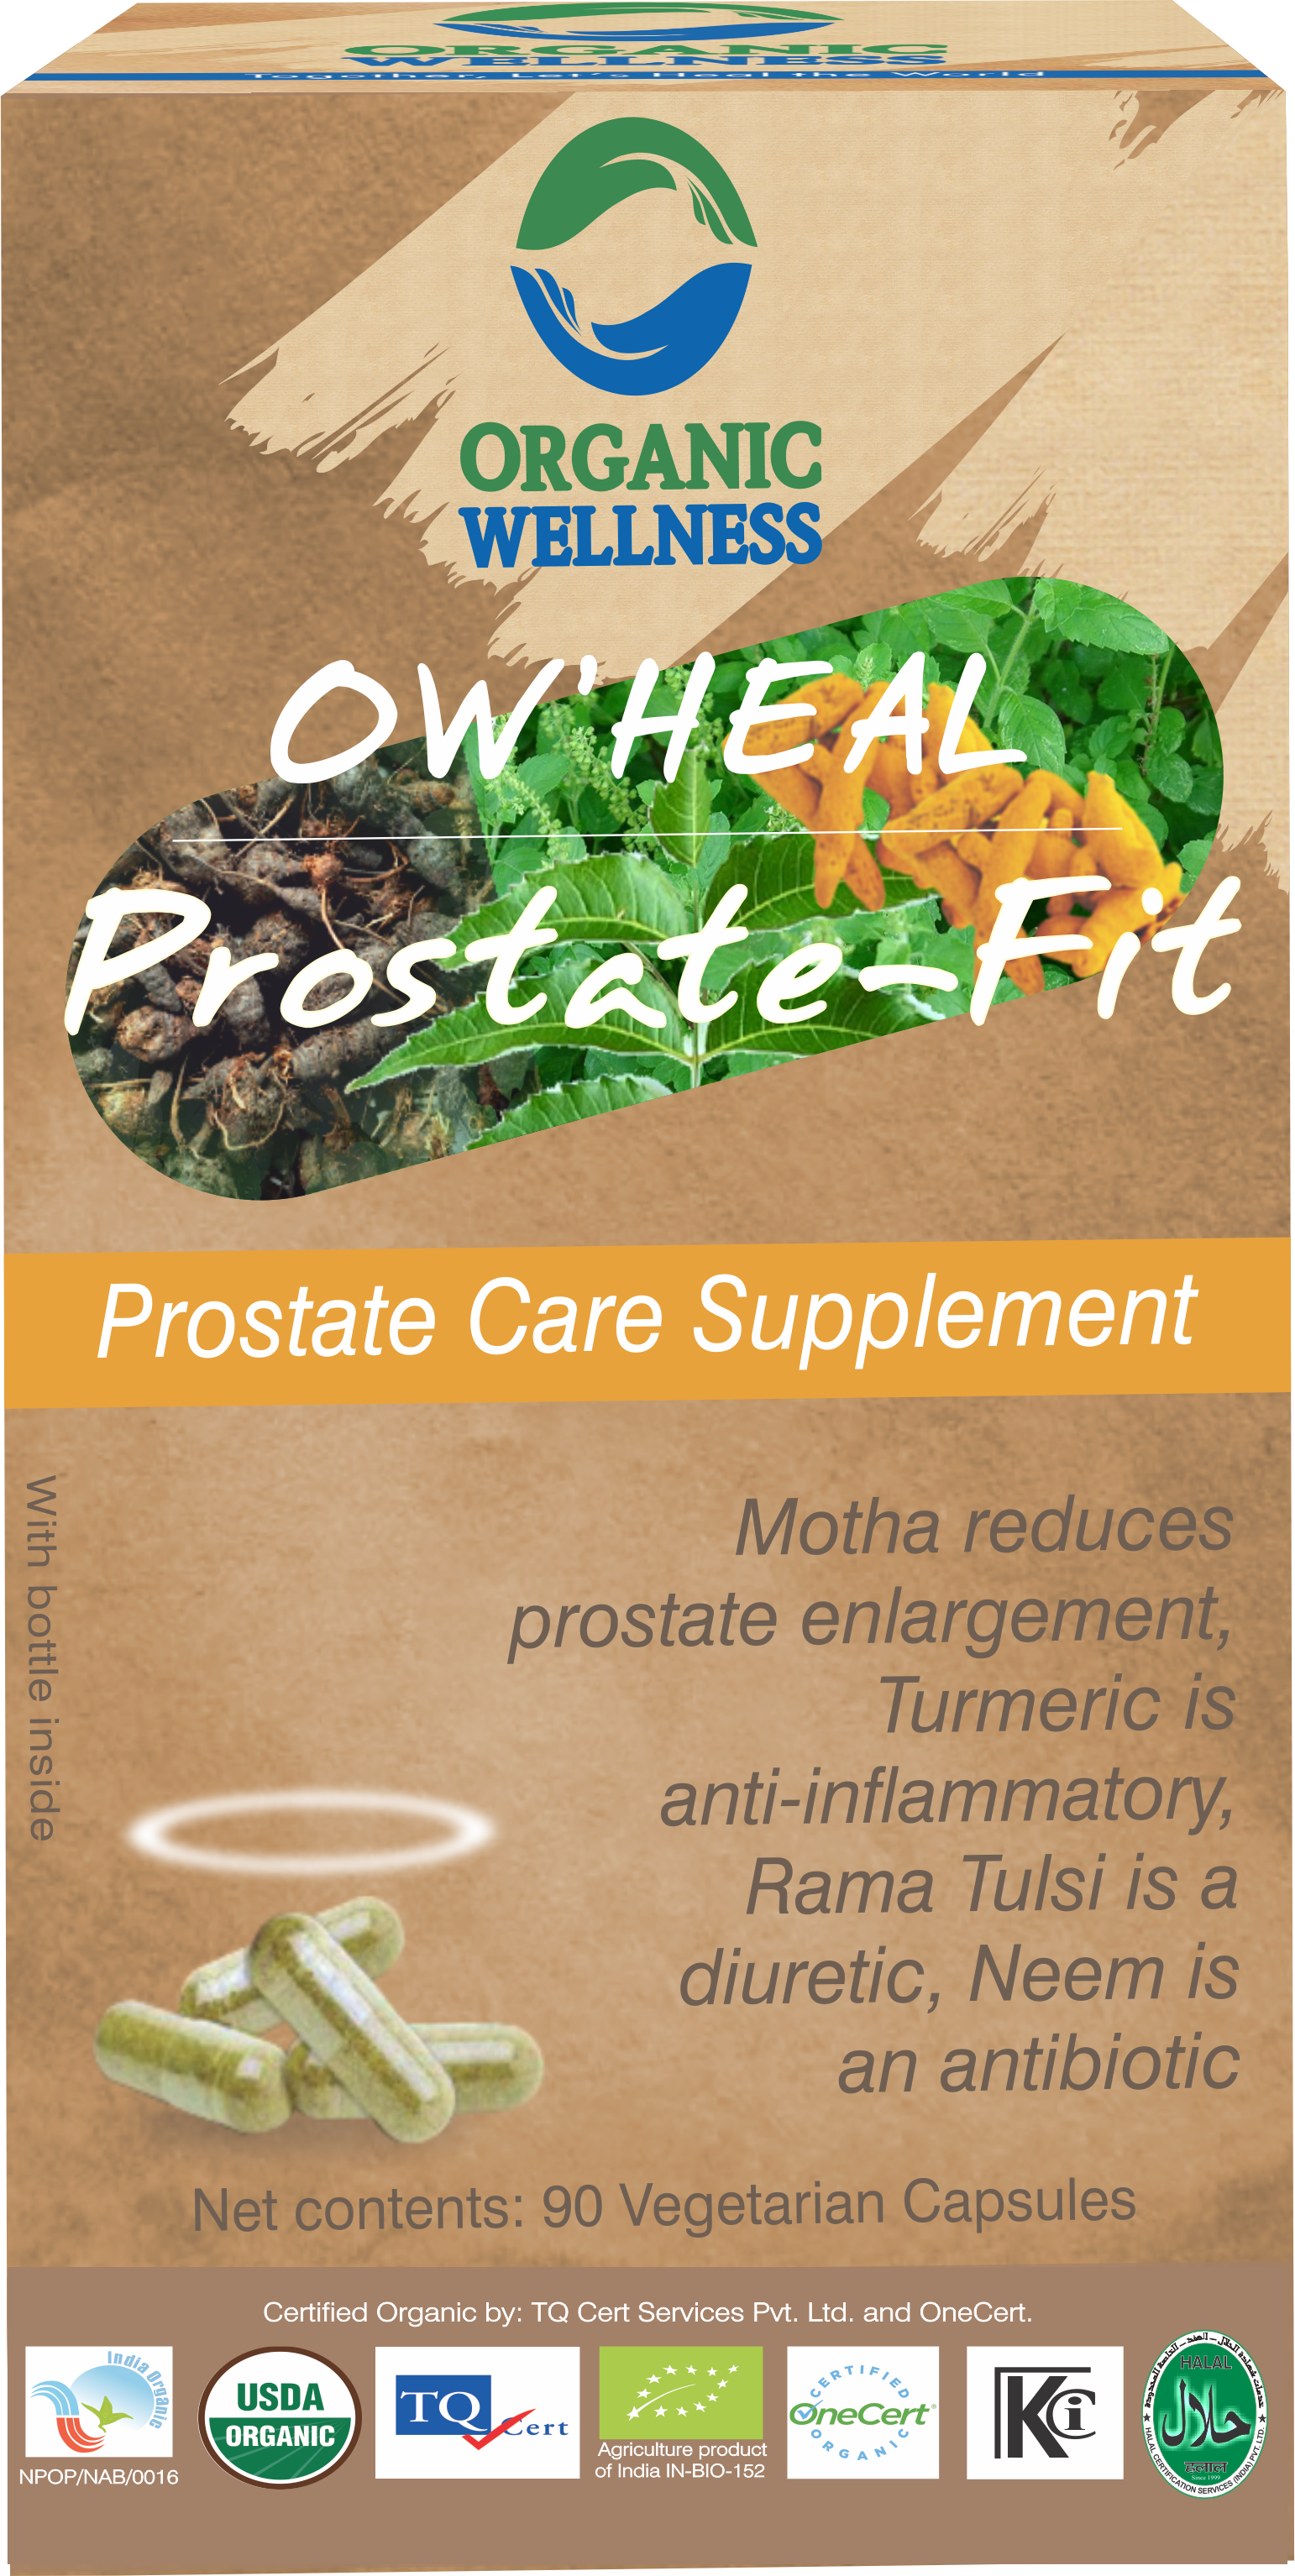 Buy Organic Wellness Heal Prostate Fit Capsule at Best Price Online